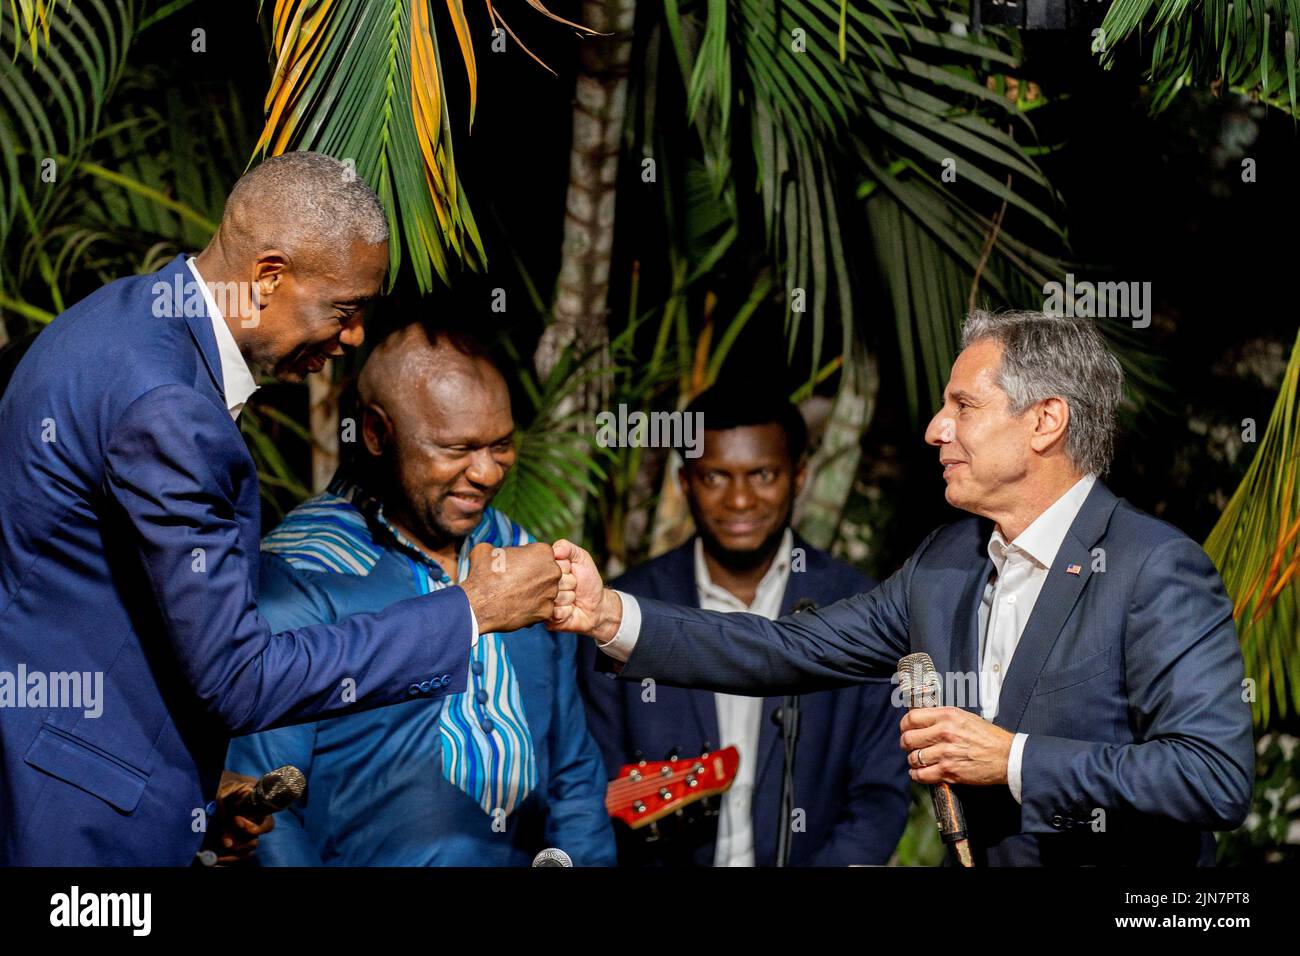 U.S. Secretary of State Antony Blinken greets former NBA basketball superstar and Congo native Dikembe Mutombo as they take the stage with the “Rainbow Band” to say a few words at Villa Kilimanjaro in Kinshasa, Democratic Republic of the Congo, August 9, 2022. Andrew Harnik/Pool via REUTERS Stock Photo